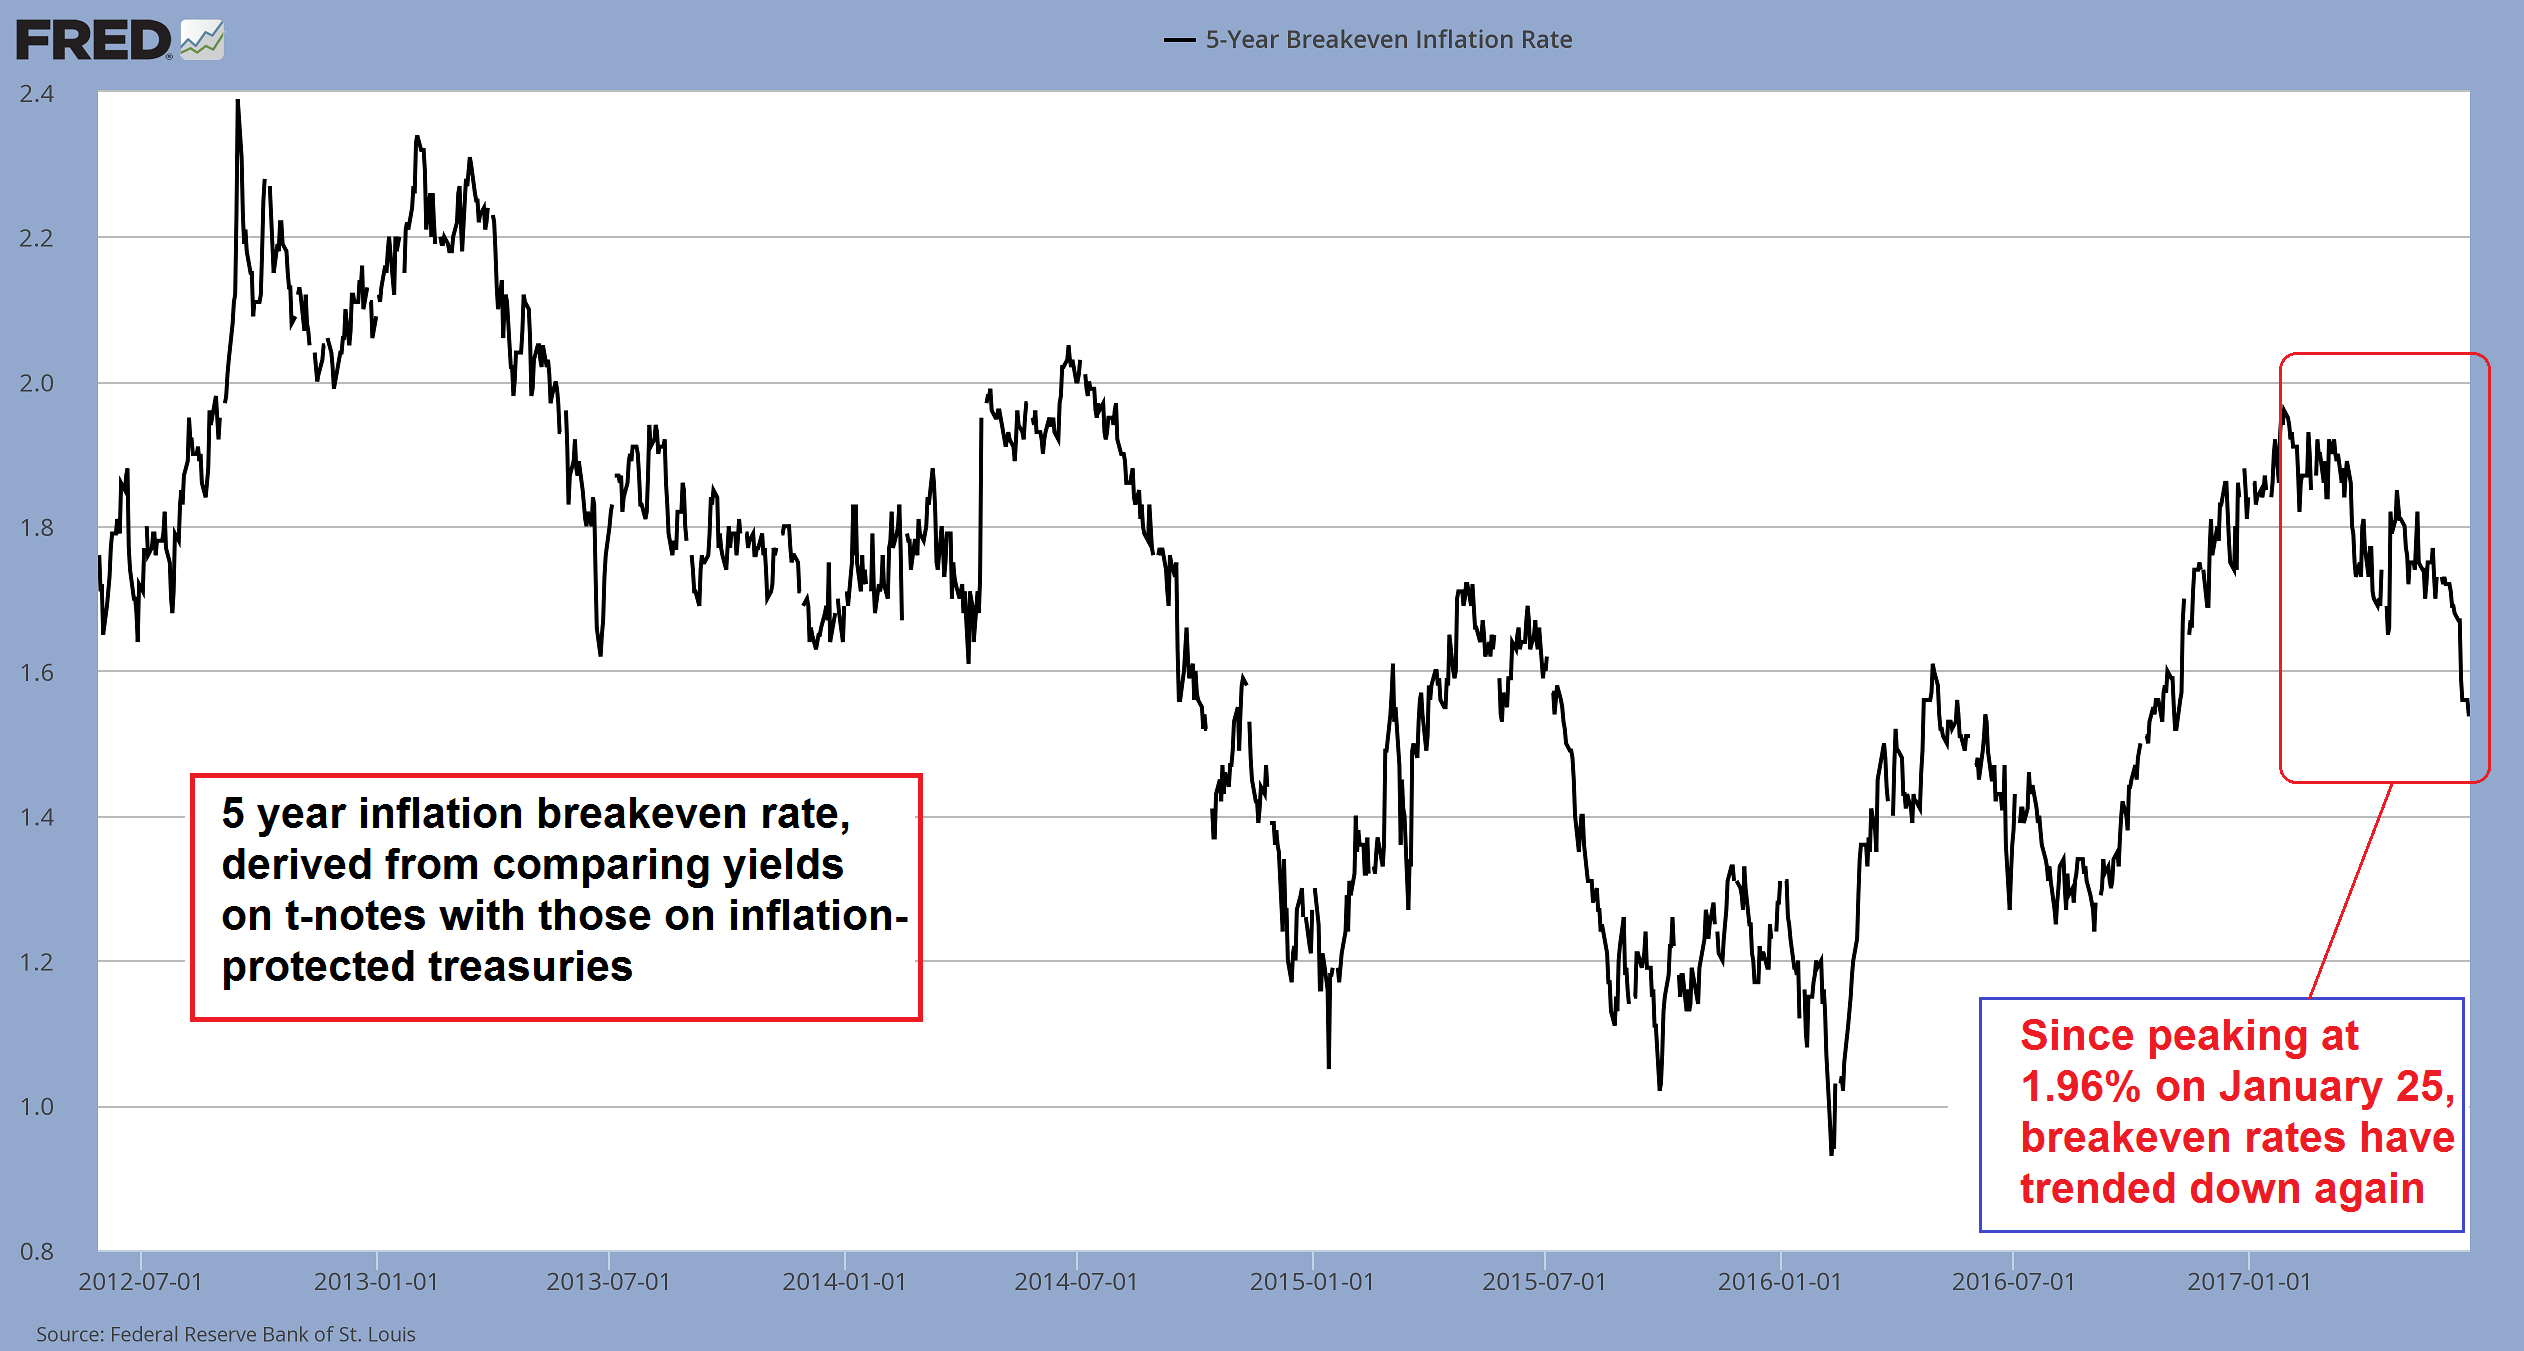 5-Y Breakeven Inflation Rate 2012-2017